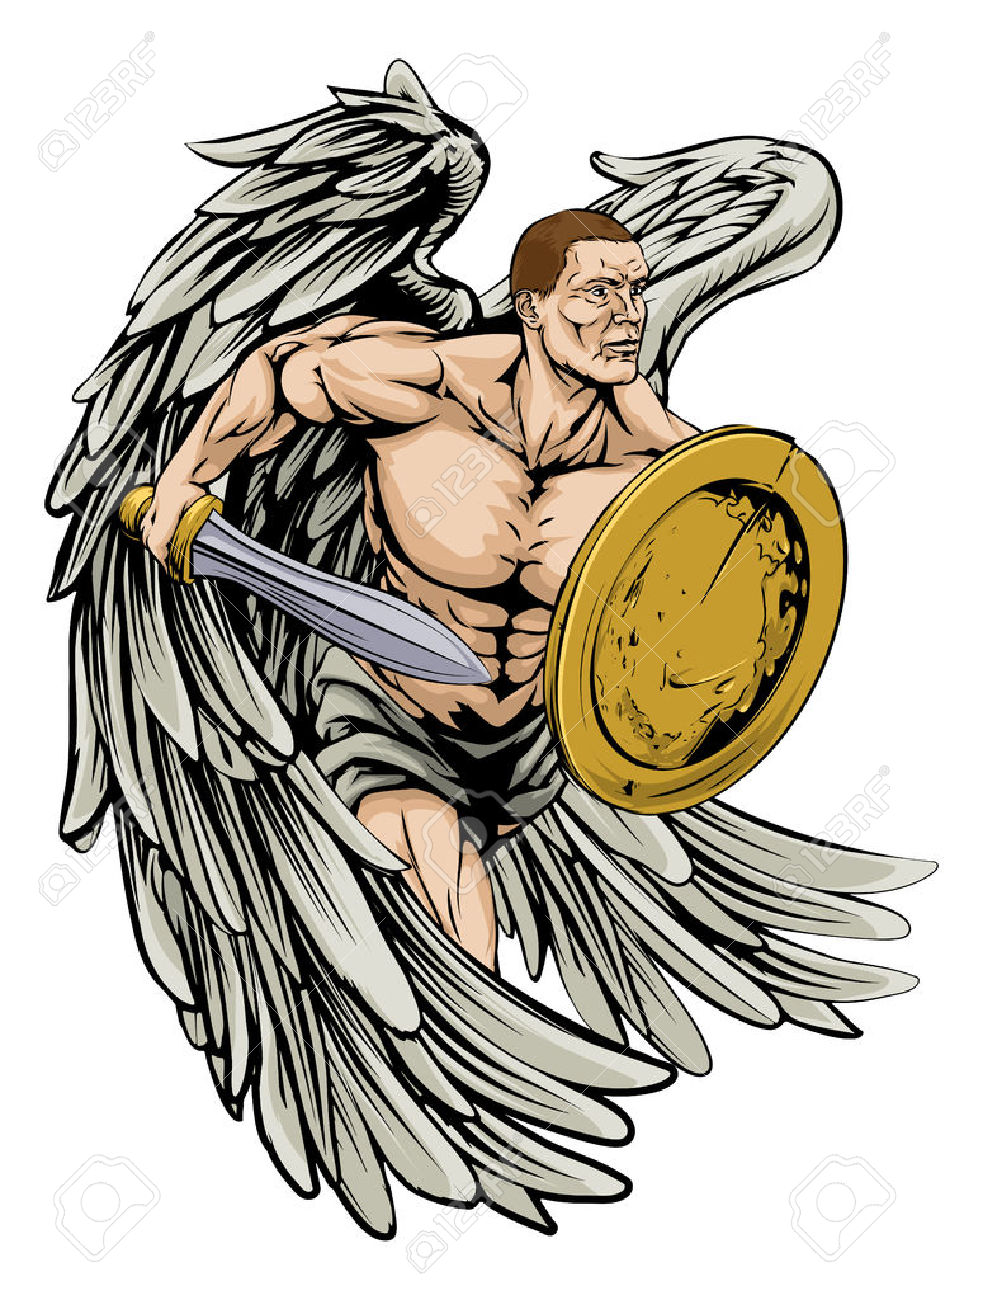 Angel Warrior clipart #8, Download drawings